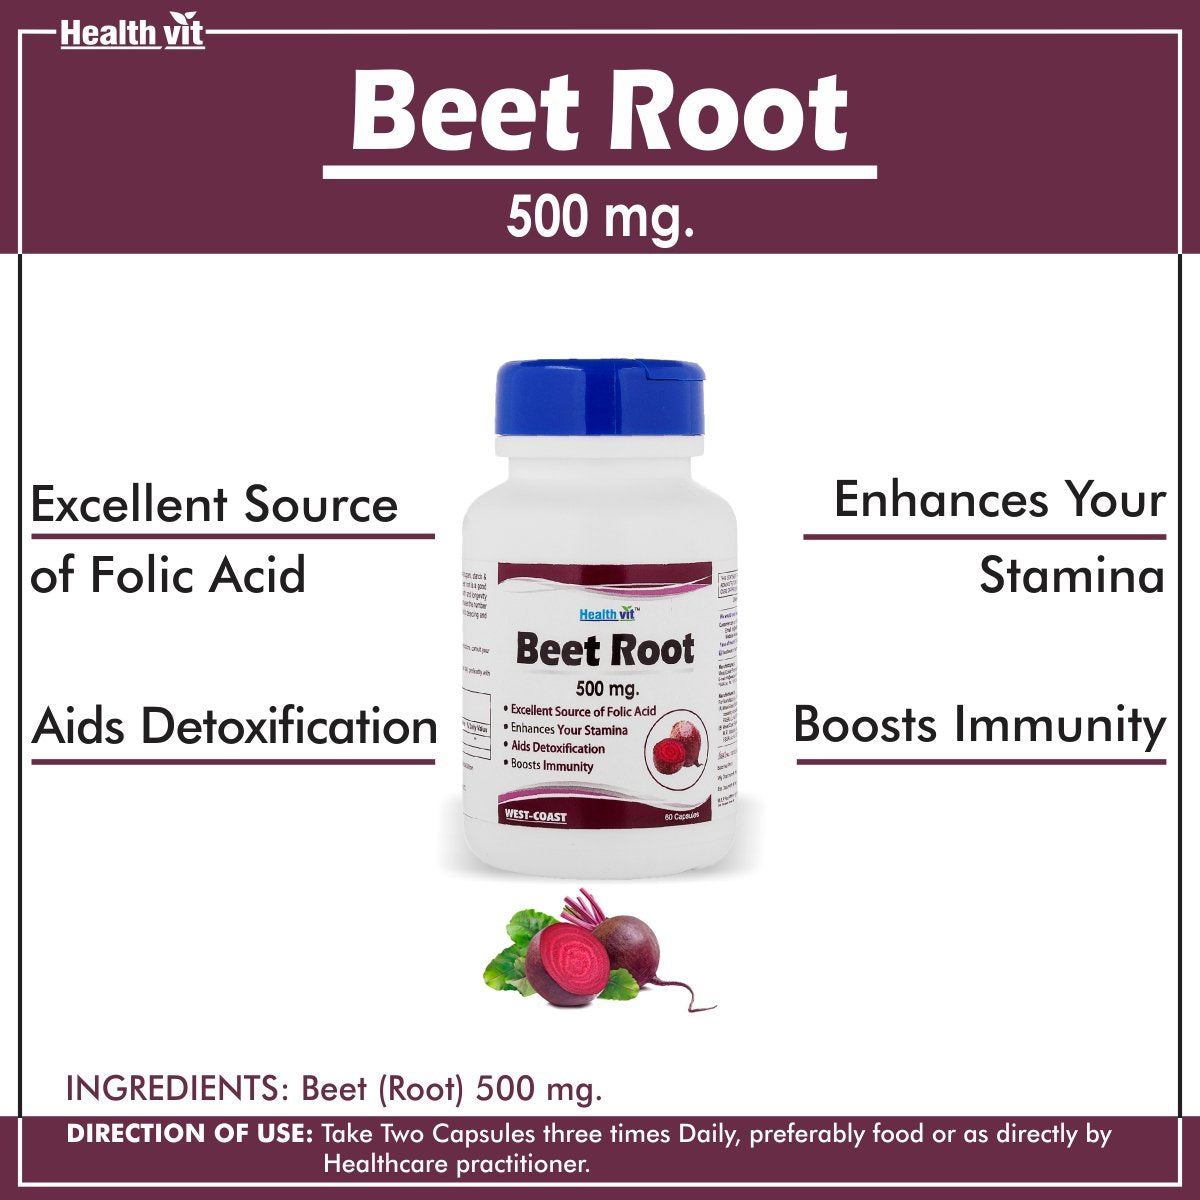 Healthvit Beet Root 500mg - Excellent Source Of Folic Acid | Healthy Heart, Endurance, Nitric Oxide Boosting Supplement | Boosts Immunity & Your Stamin | 60 Capsules